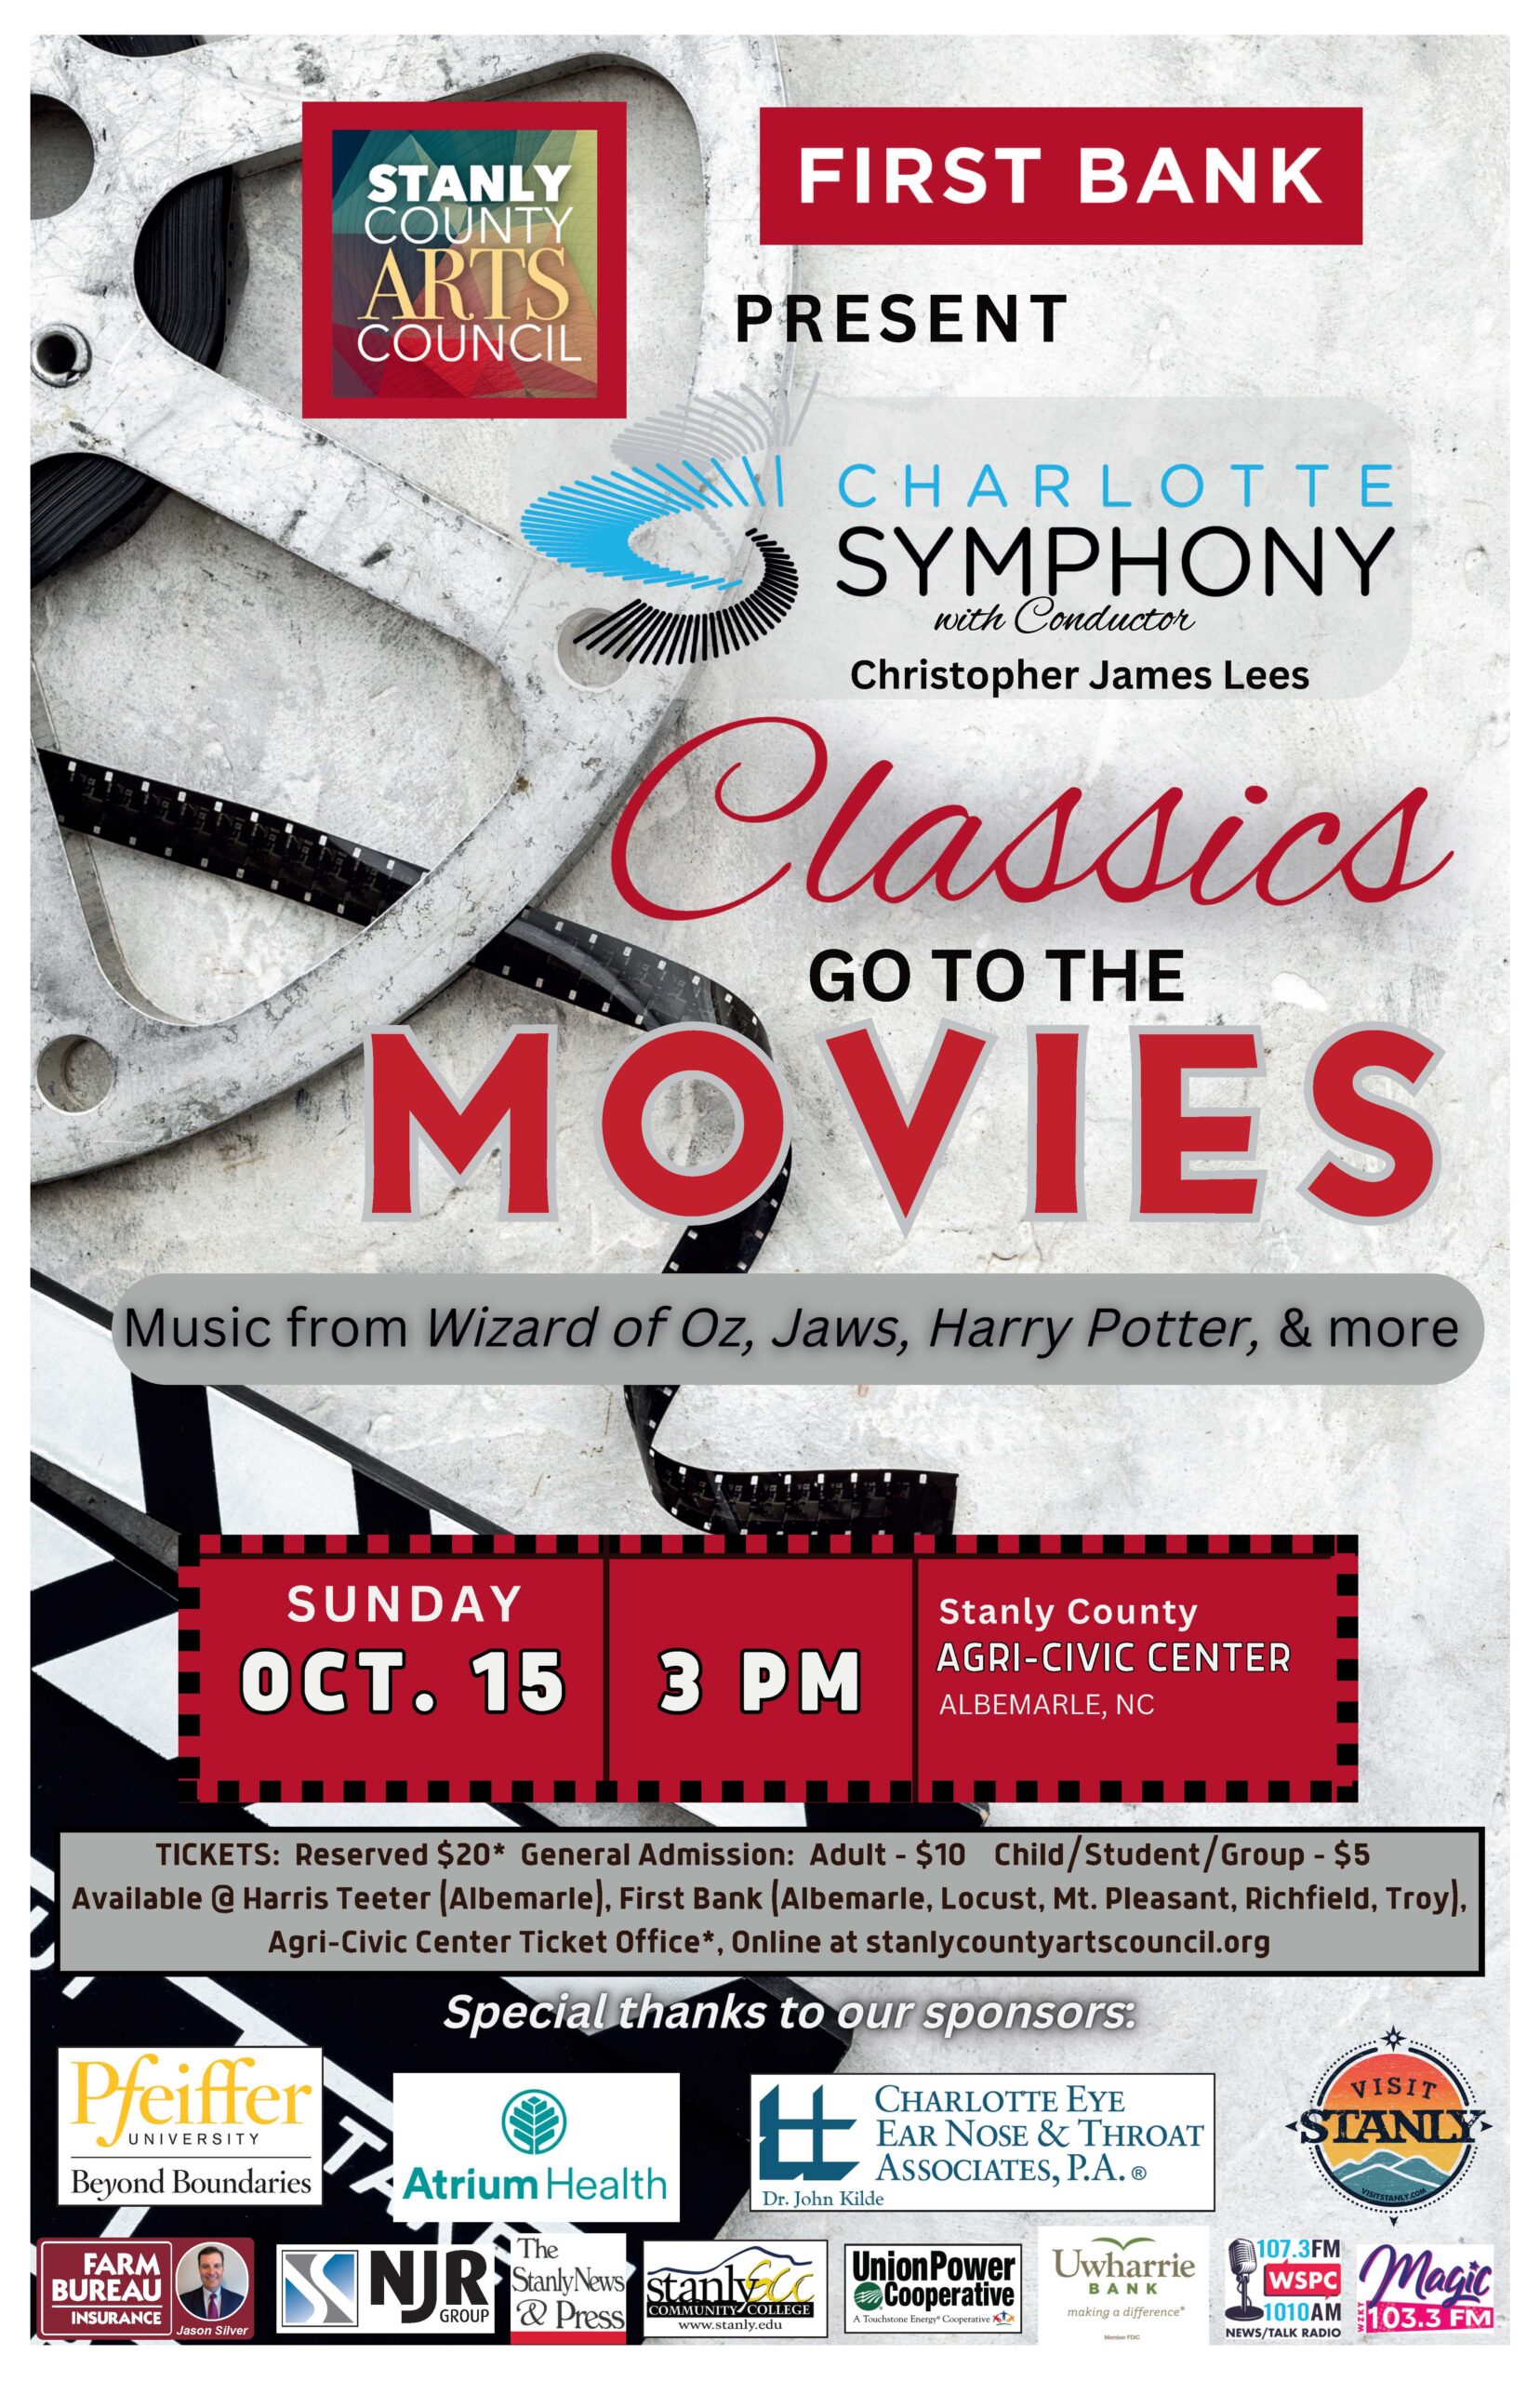 Stanly County Arts Council.
First bank present, Charlotte Symphony with Conductor Christopher James Lees.
Classics go to the Movies. Music from Wizard of Oz, Jaws, Harry Potter, & more
Sunday, October 15th, at 3 PM. Stanly County Agri-CIvic Canter, Albemarle NC
Tickets cost 20 dollars for reservations, ten dollars for general admission for adult, and five dollars for general admission for a child, student, or group.